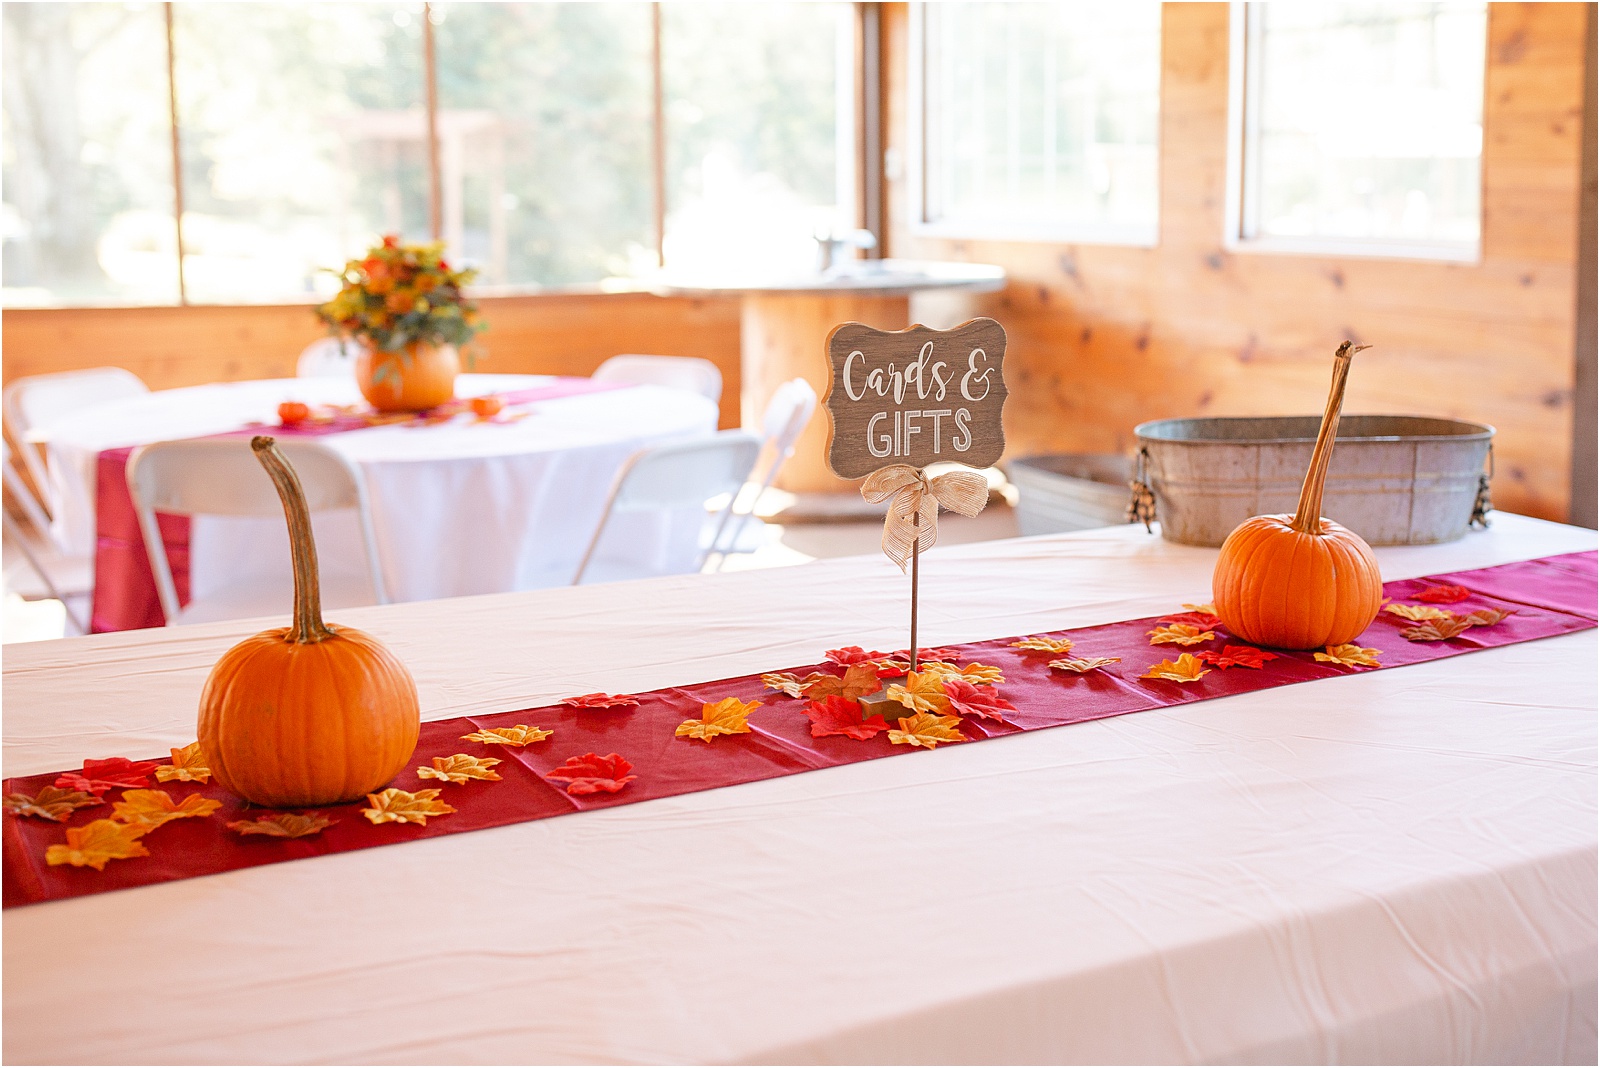 Gift table at wedding reception with leaves and pumpkins